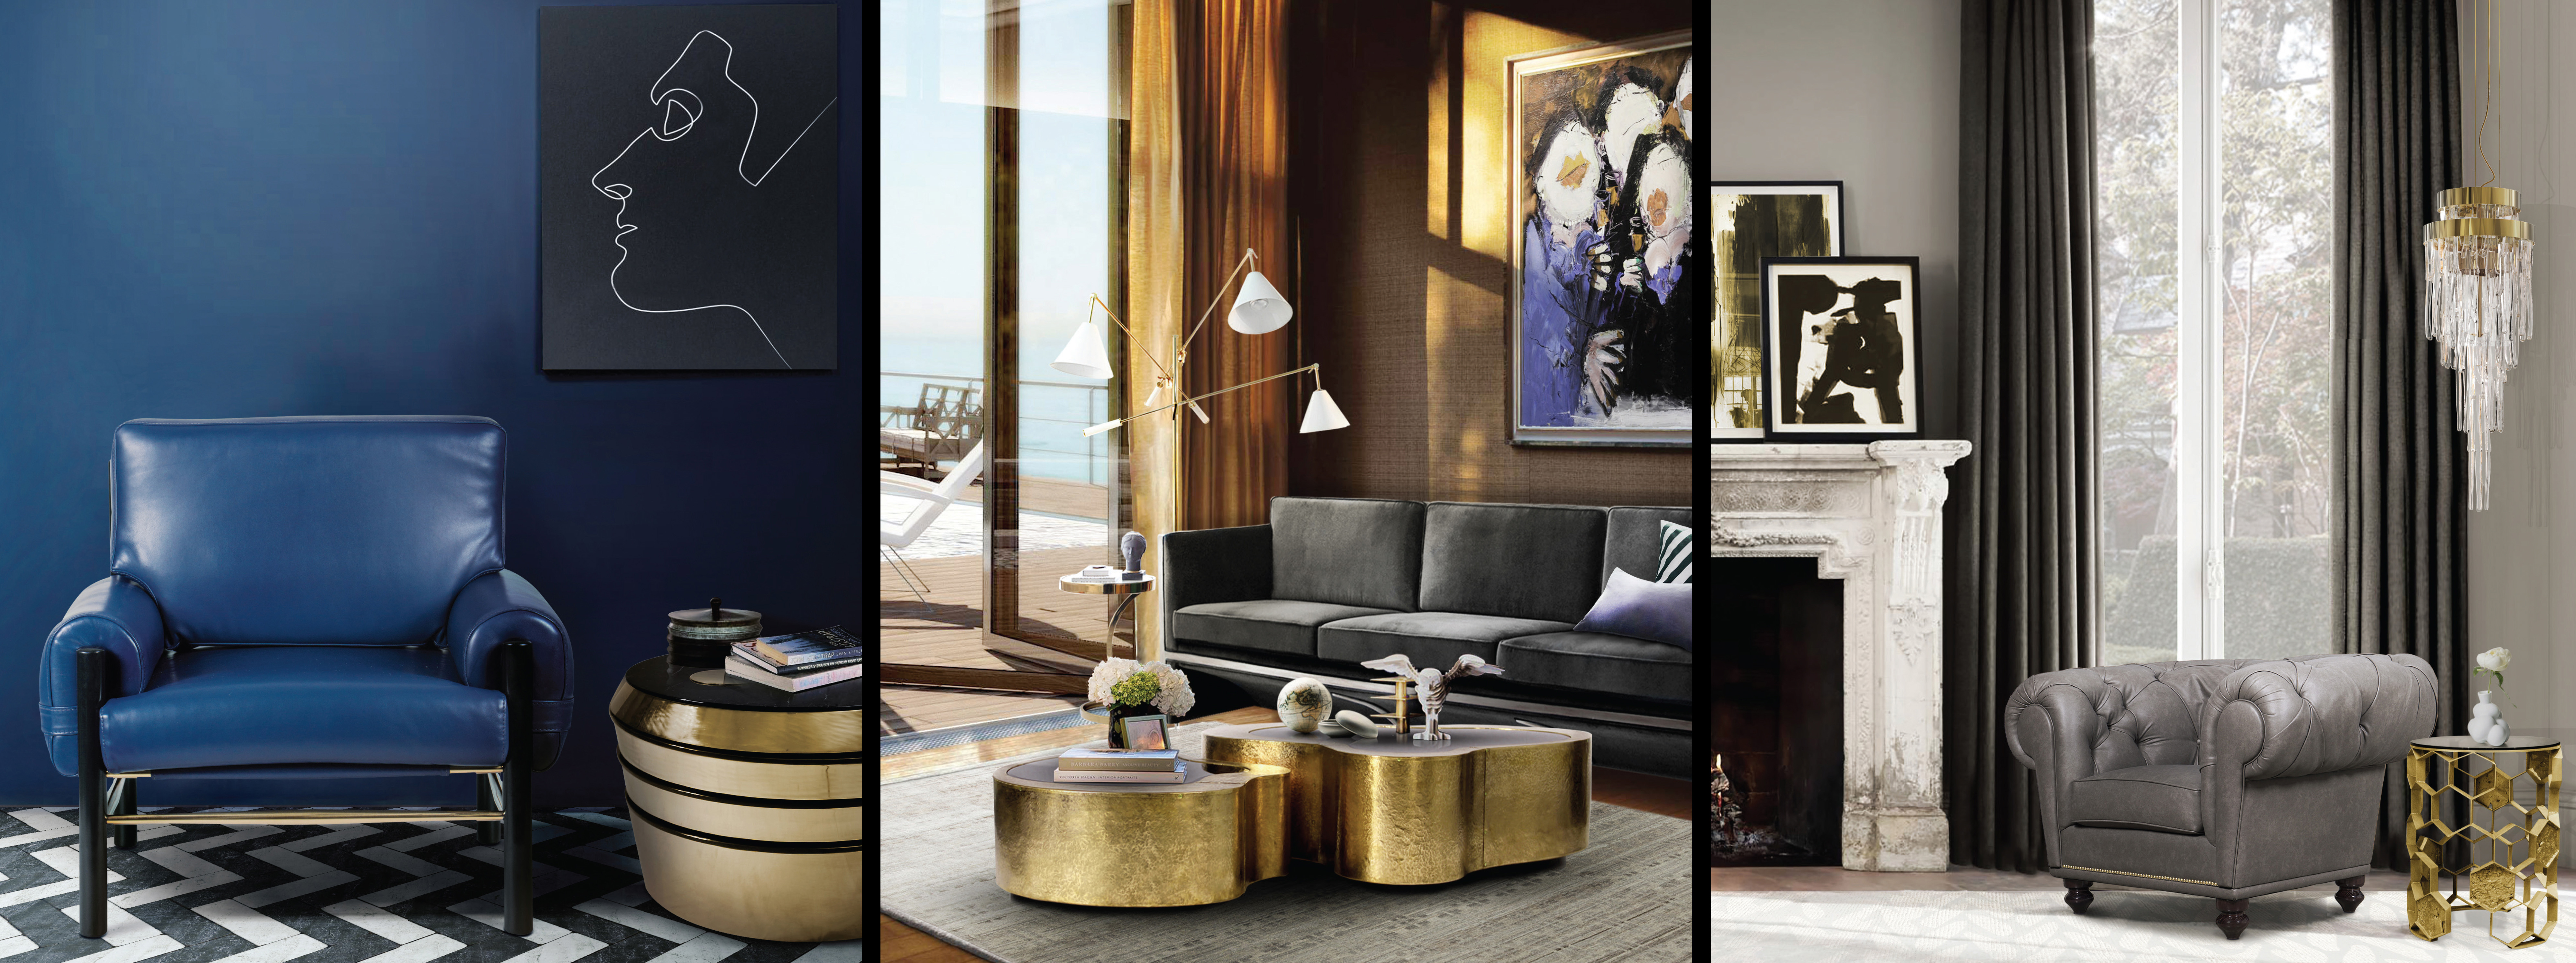 Living Rooms With Modern-Classic Inspirations by Covet House ‹ Fashion Trendsetter7958 x 2976